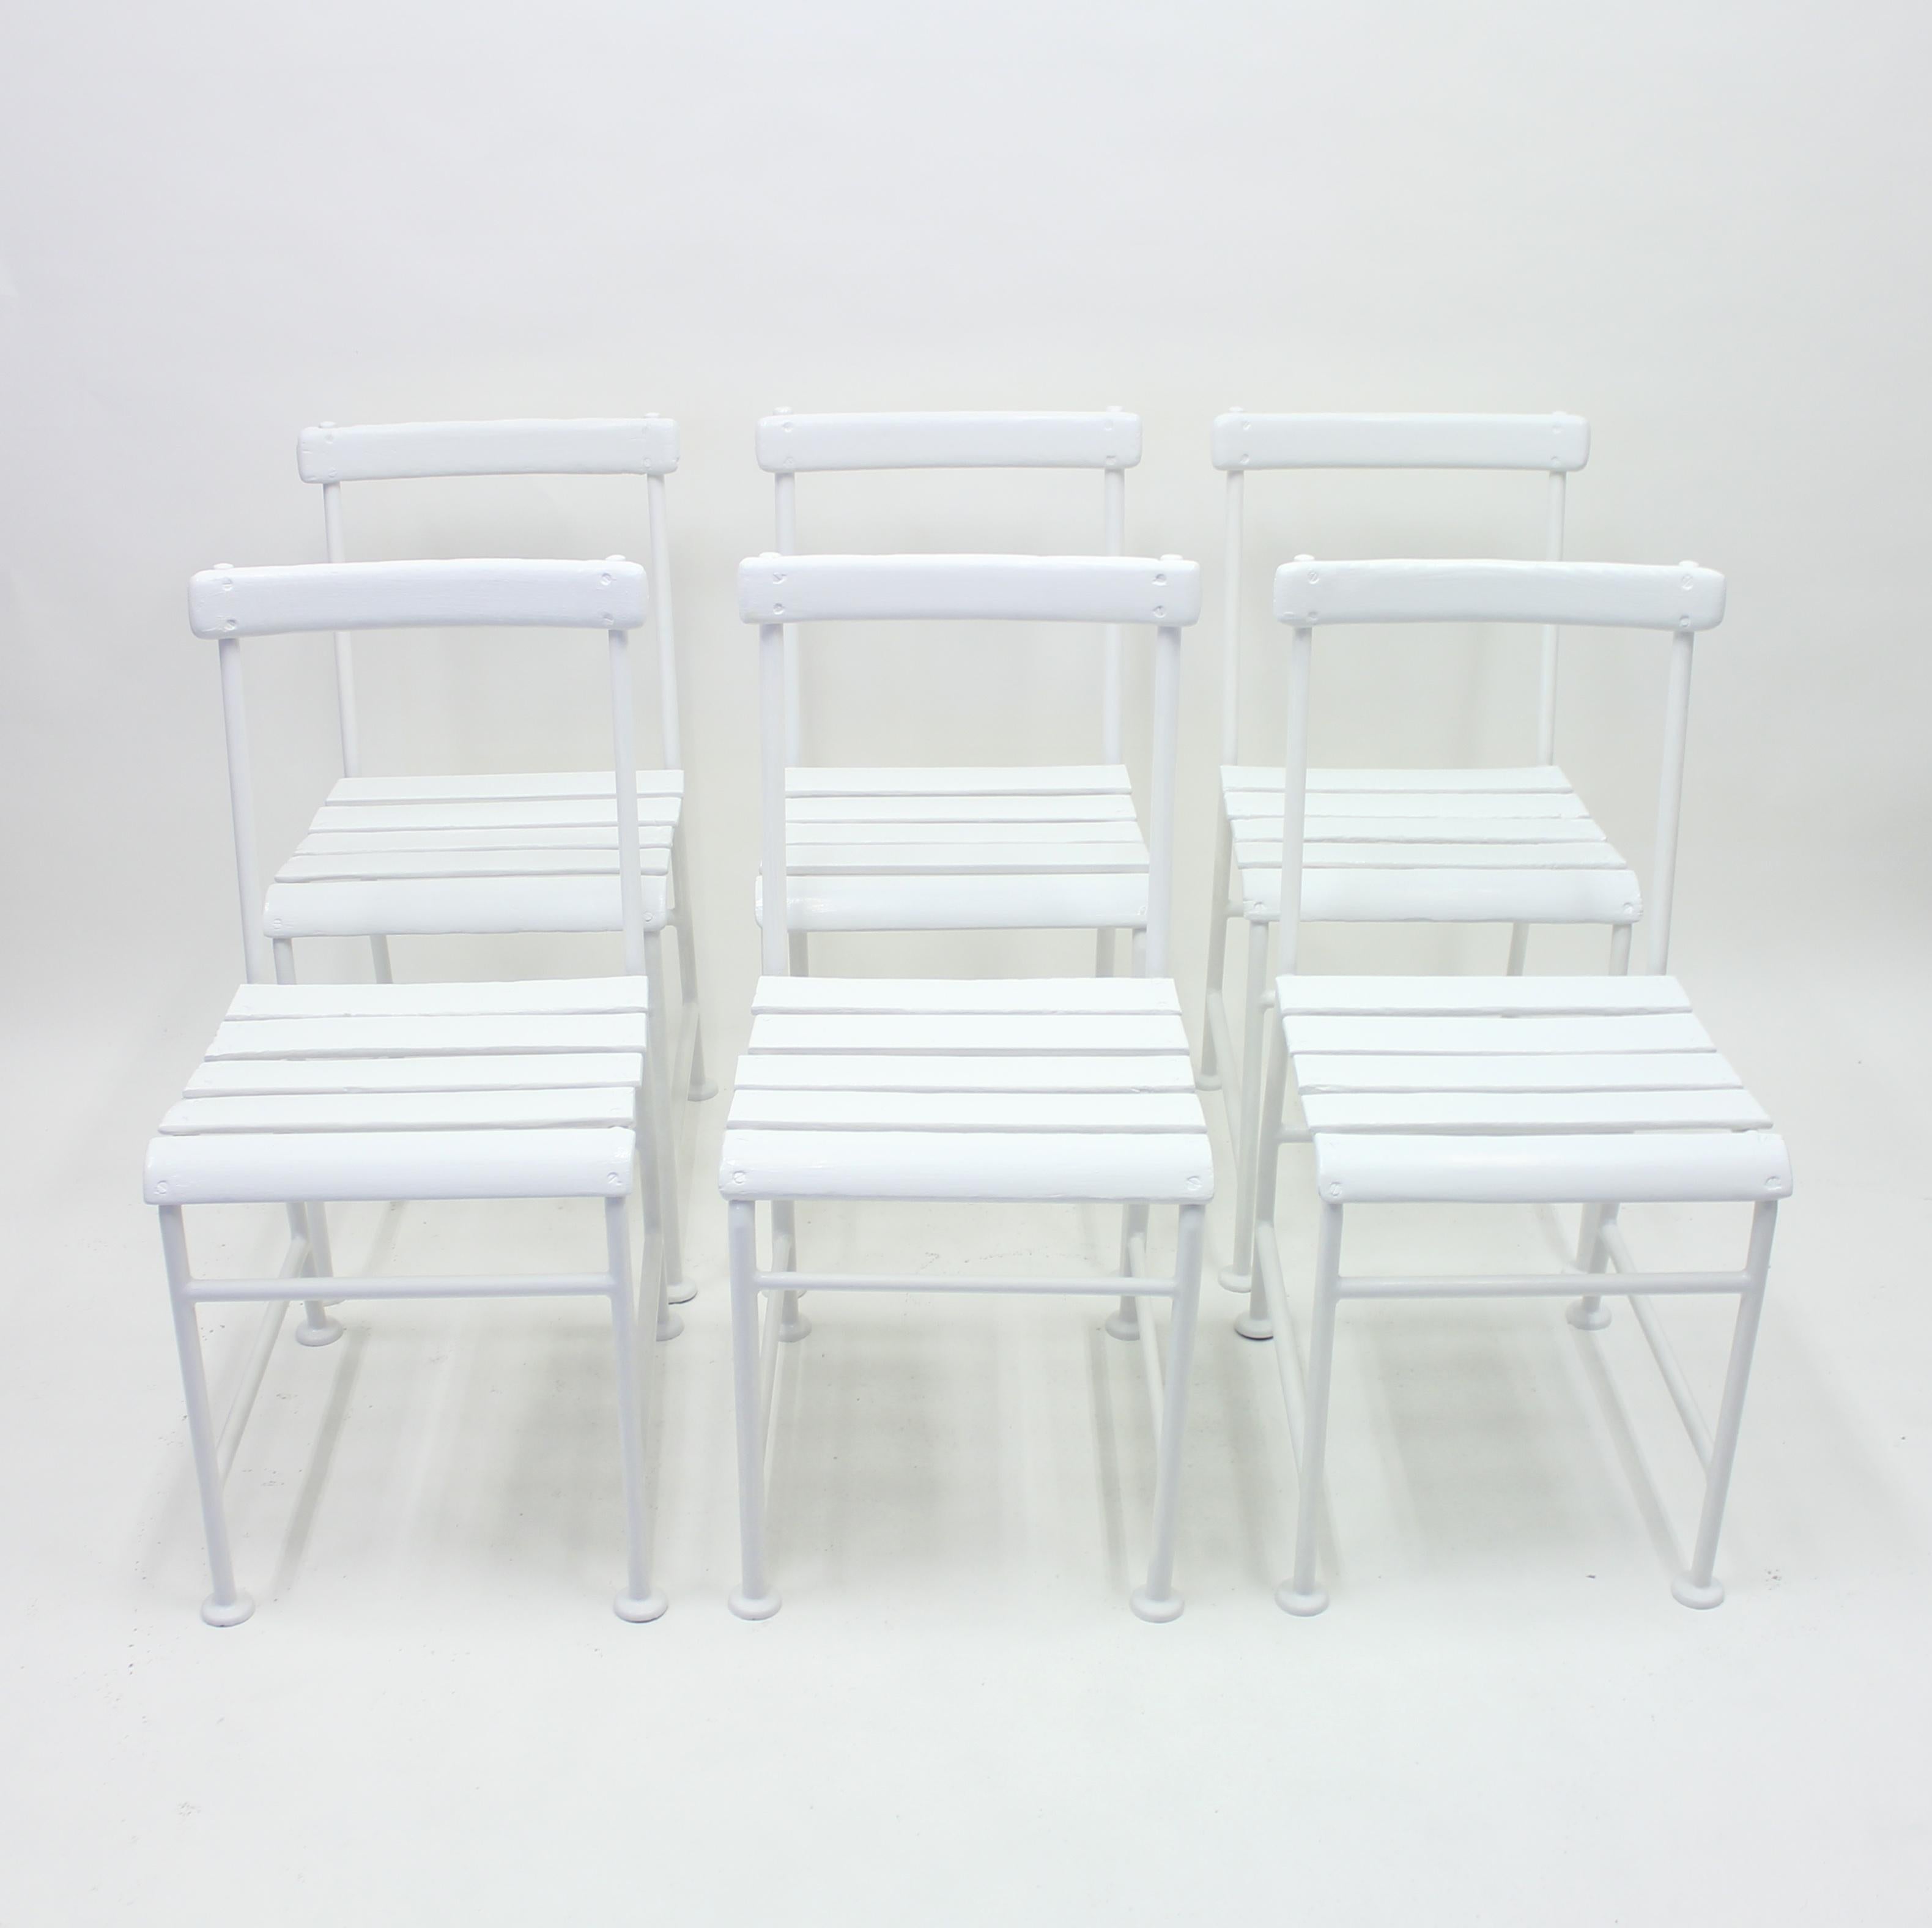 Set of 6 chairs designed by Swedish architect Gunnar Asplund for Iwan B. Giertz in Flen, Sweden, 1930s. This model was shown on the 1930 Stockholm Exhibition. Mainly at the outdoor 